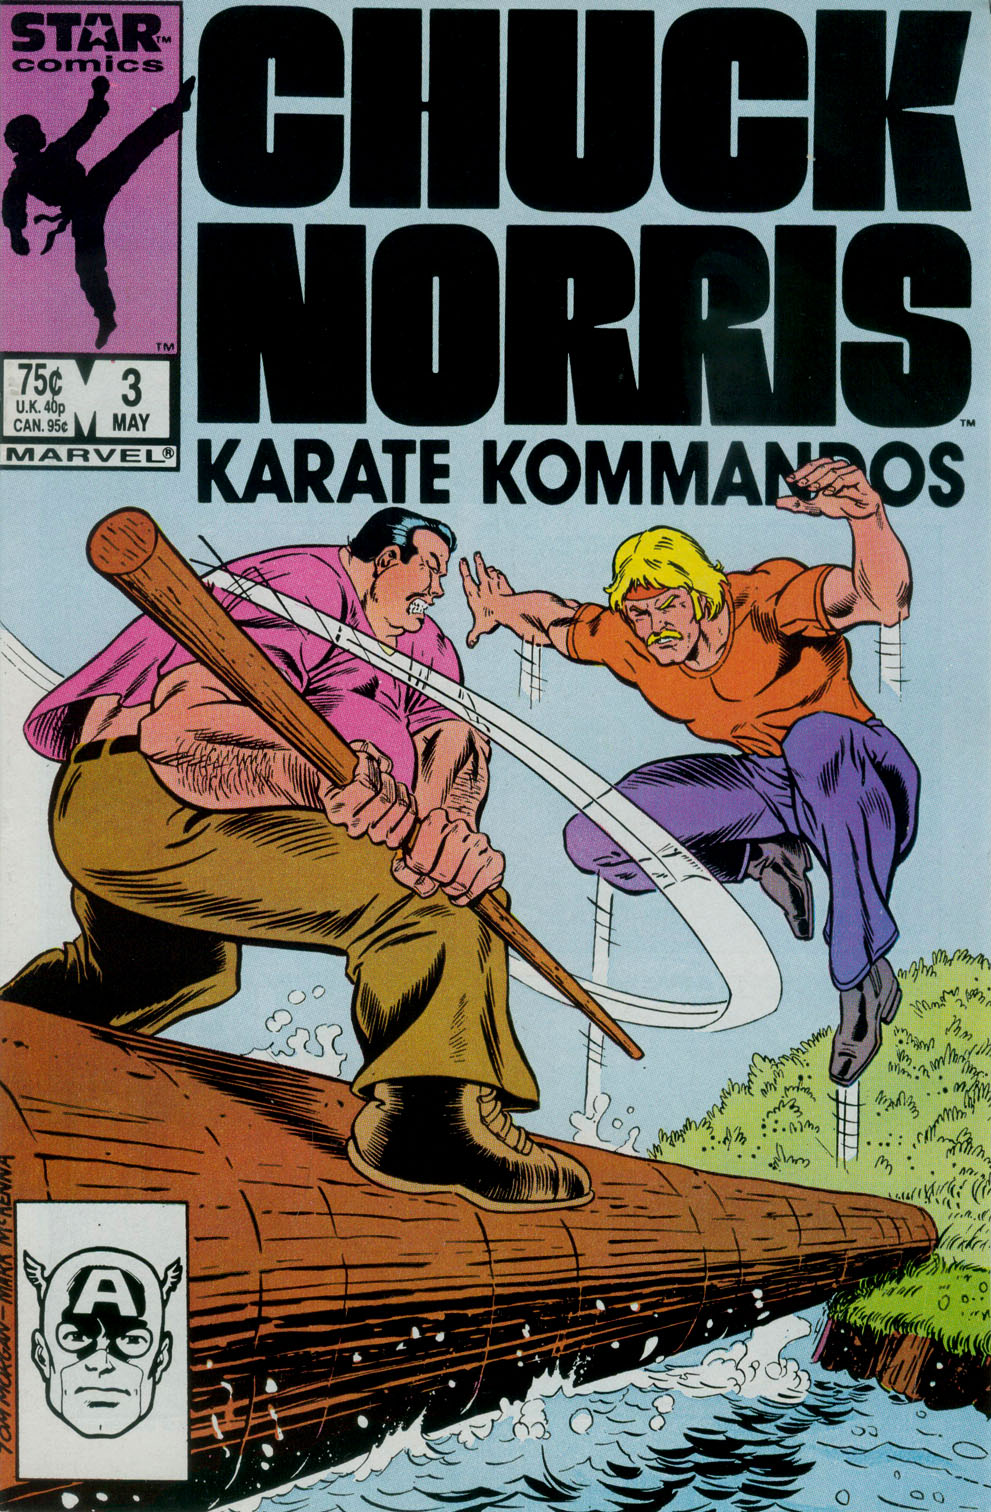 Read online Chuck Norris and the Karate Kommandos comic -  Issue #3 - 1